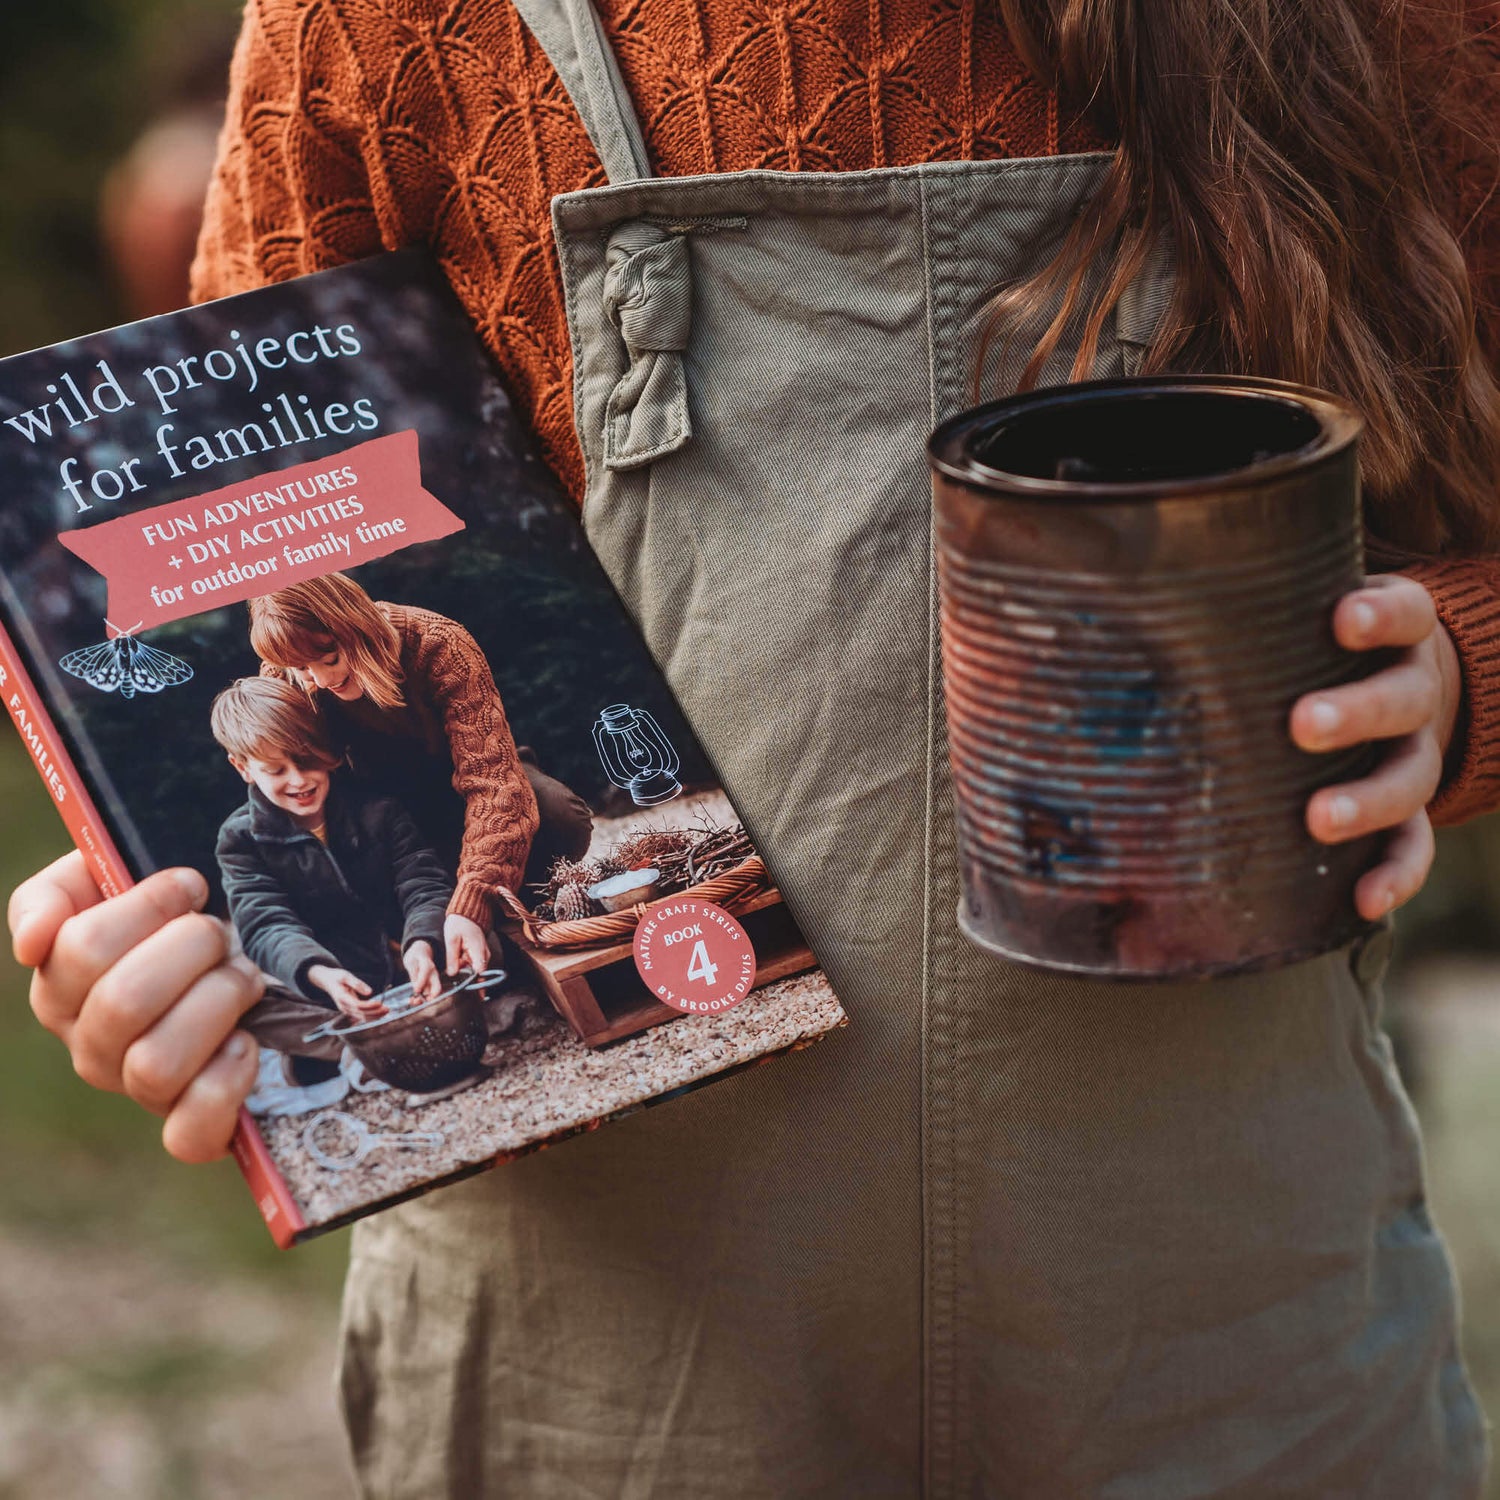 Child holding tin of DIY homemade charcoal and Wild Projects for Families book has fun adventures and DIY activities for family outdoor time, is made in Australia by Your Wild Books.